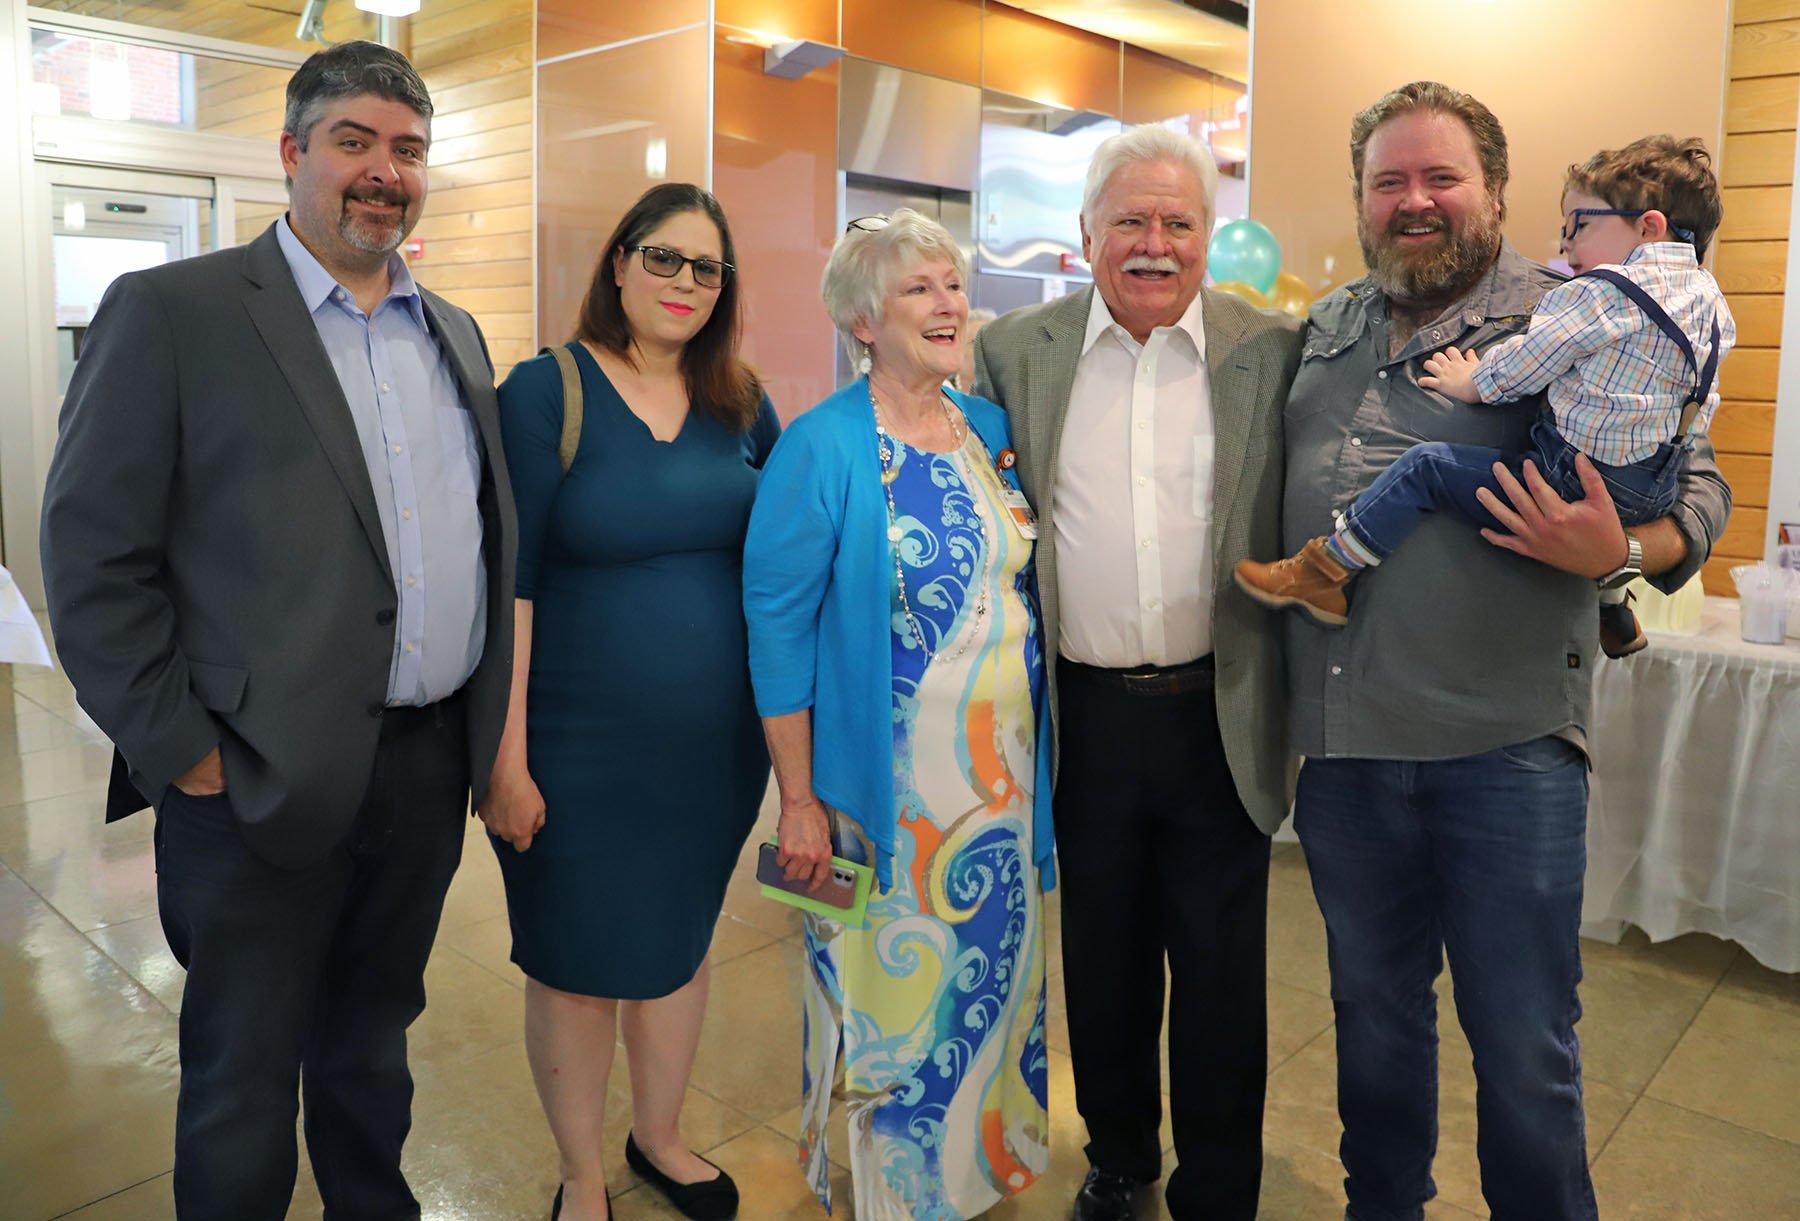 Dr. Vaunette Fay, center, is joined by family at her retirement party on May 10, 2022, at Cizik School of Nursing at UTHealth Houston.